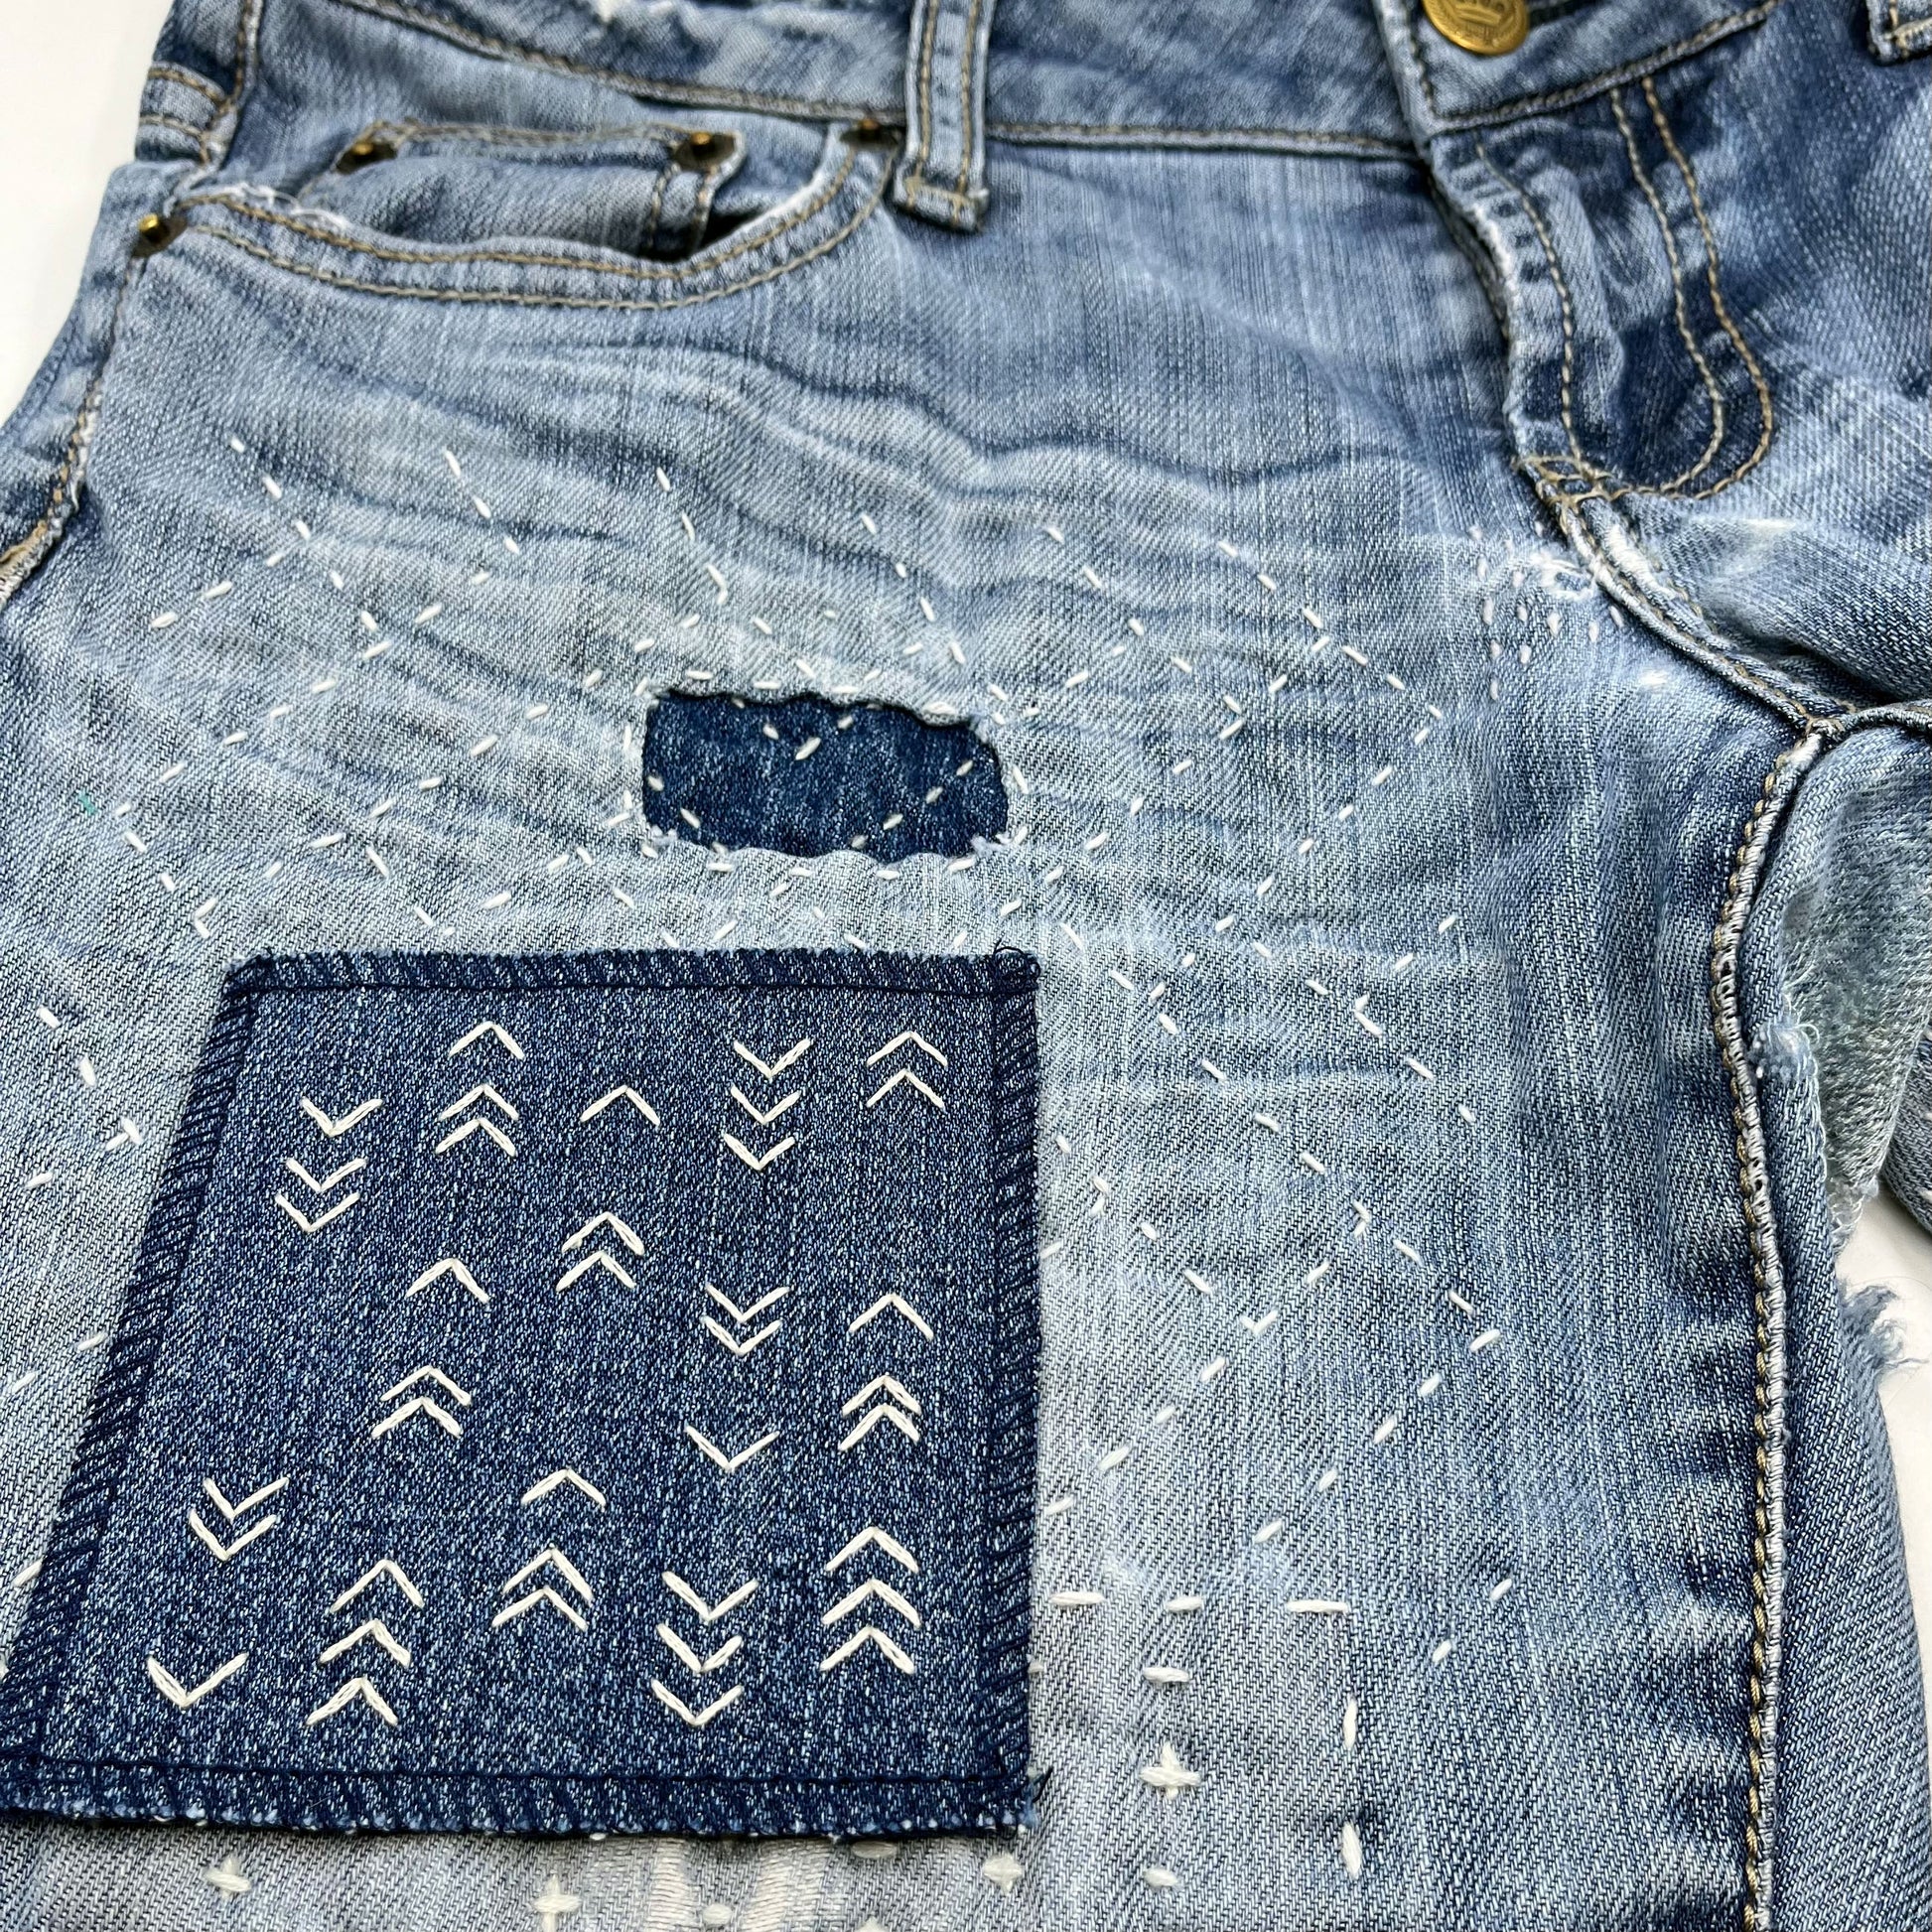 a square denim patch hand stitched in ivory with rows of unevenly spaced small chevrons facing different directions on pair of jeans heavily mended with sashiko stitching